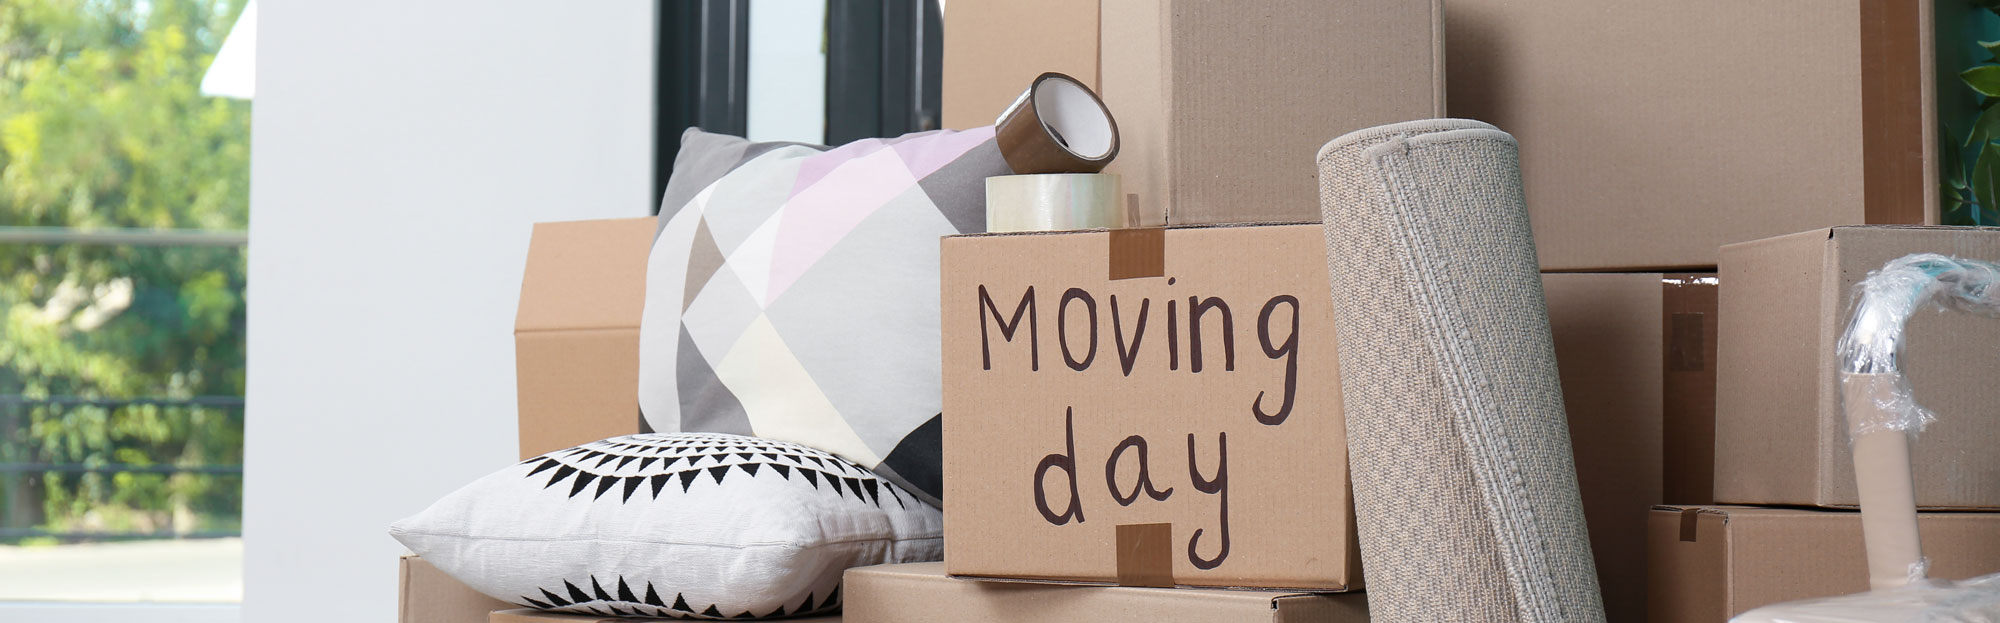 Moving Out Sleep Sound Property Management, Inc.